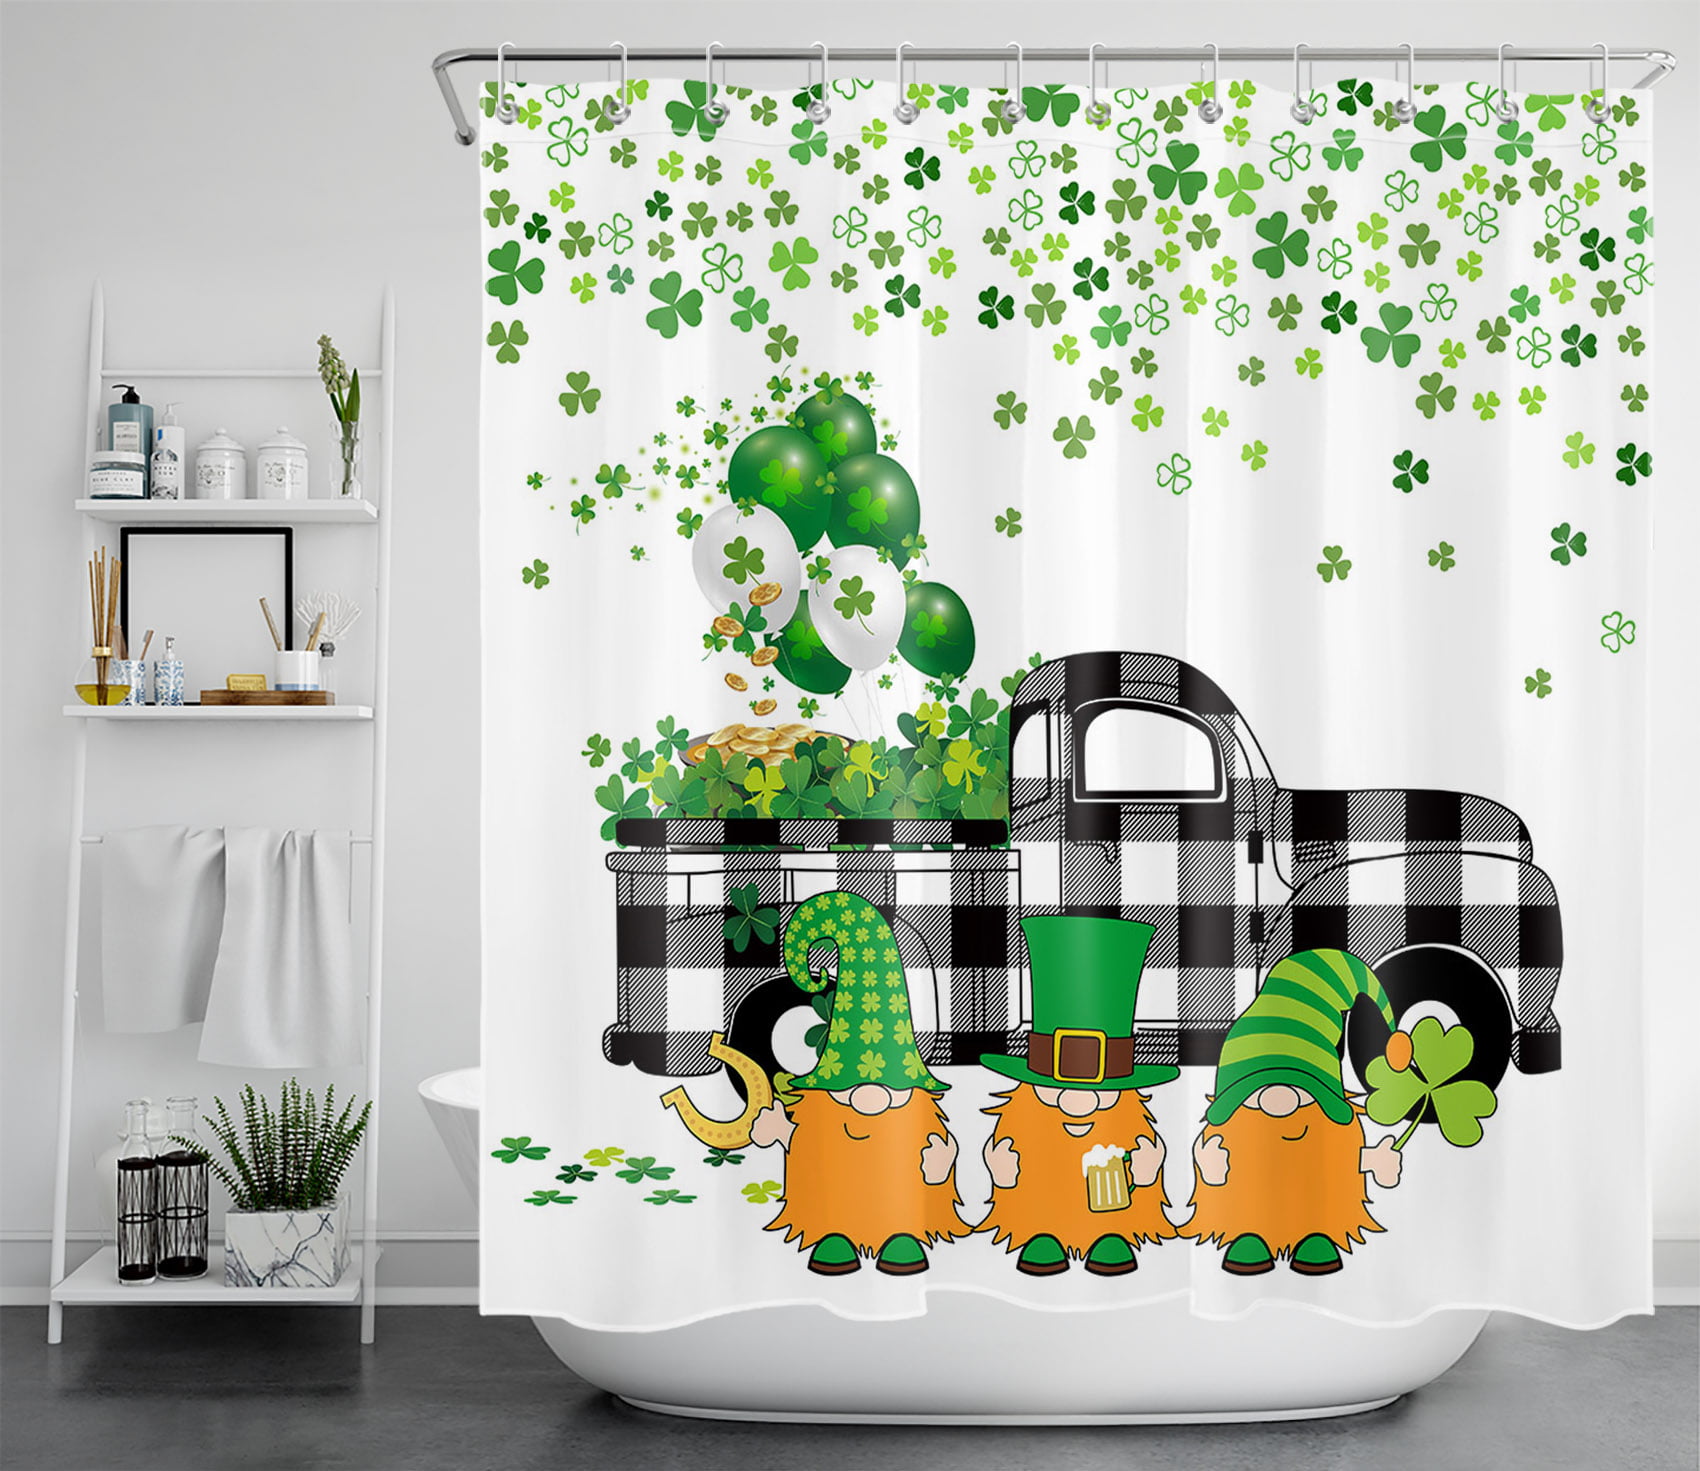 Patrick Day ladybug on Clover Flower Fabric Bath Shower Curtains Bedroom Mat Details about   St 